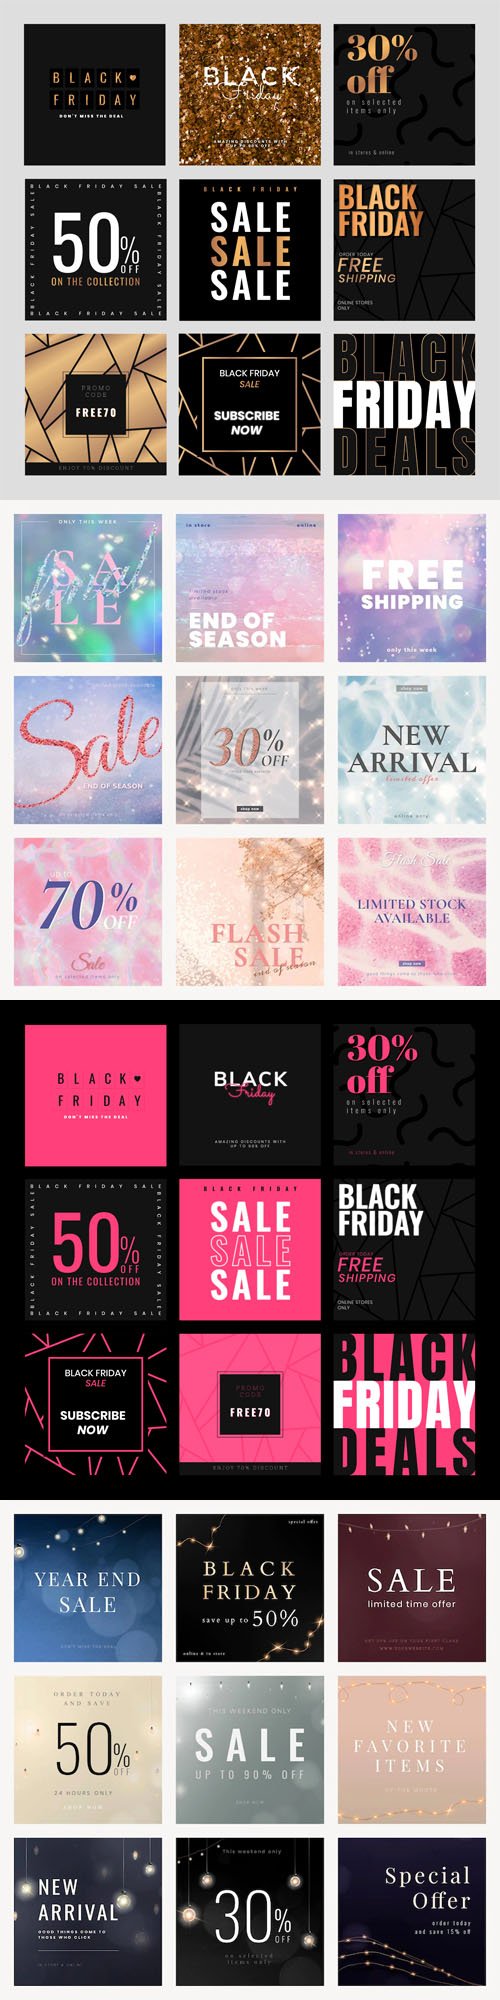 Black Friday - 50+ Text Promotional Posters Vector Templates